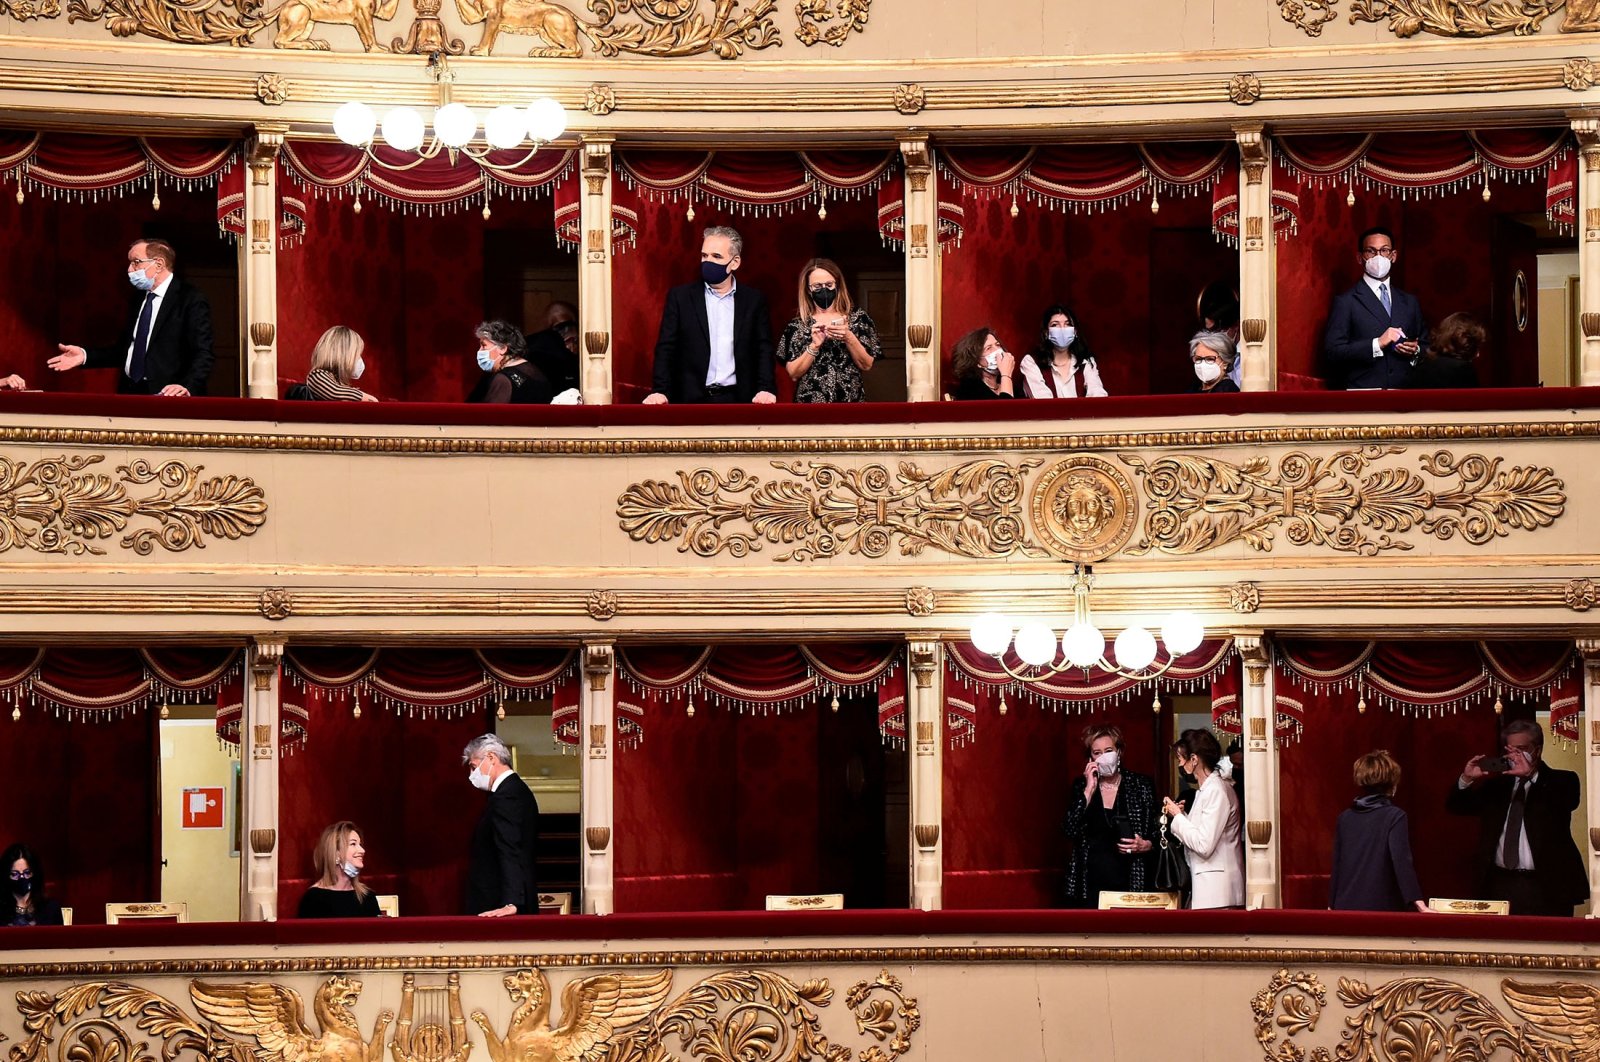 People attend the re-opening of La Scala opera house after it was closed due to the COVID-19 pandemic, in Milan, Italy, May 10, 2021. (Reuters Photo)